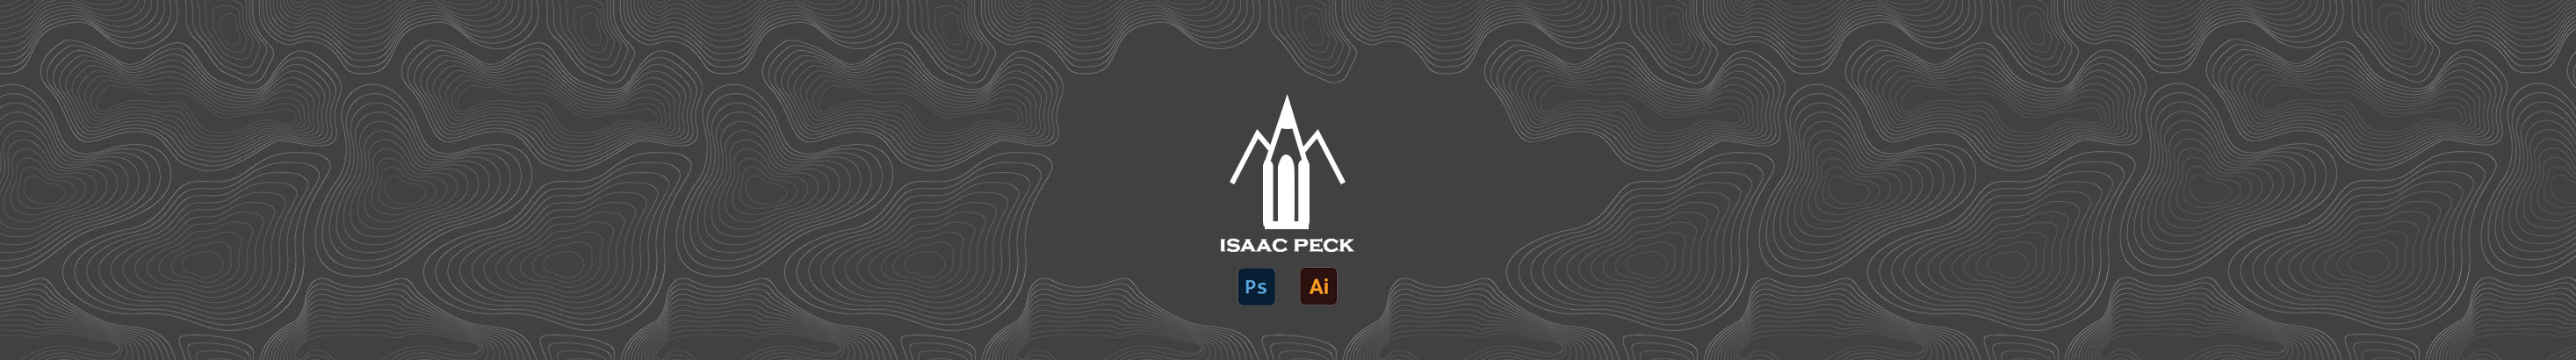 isaac peck's profile banner